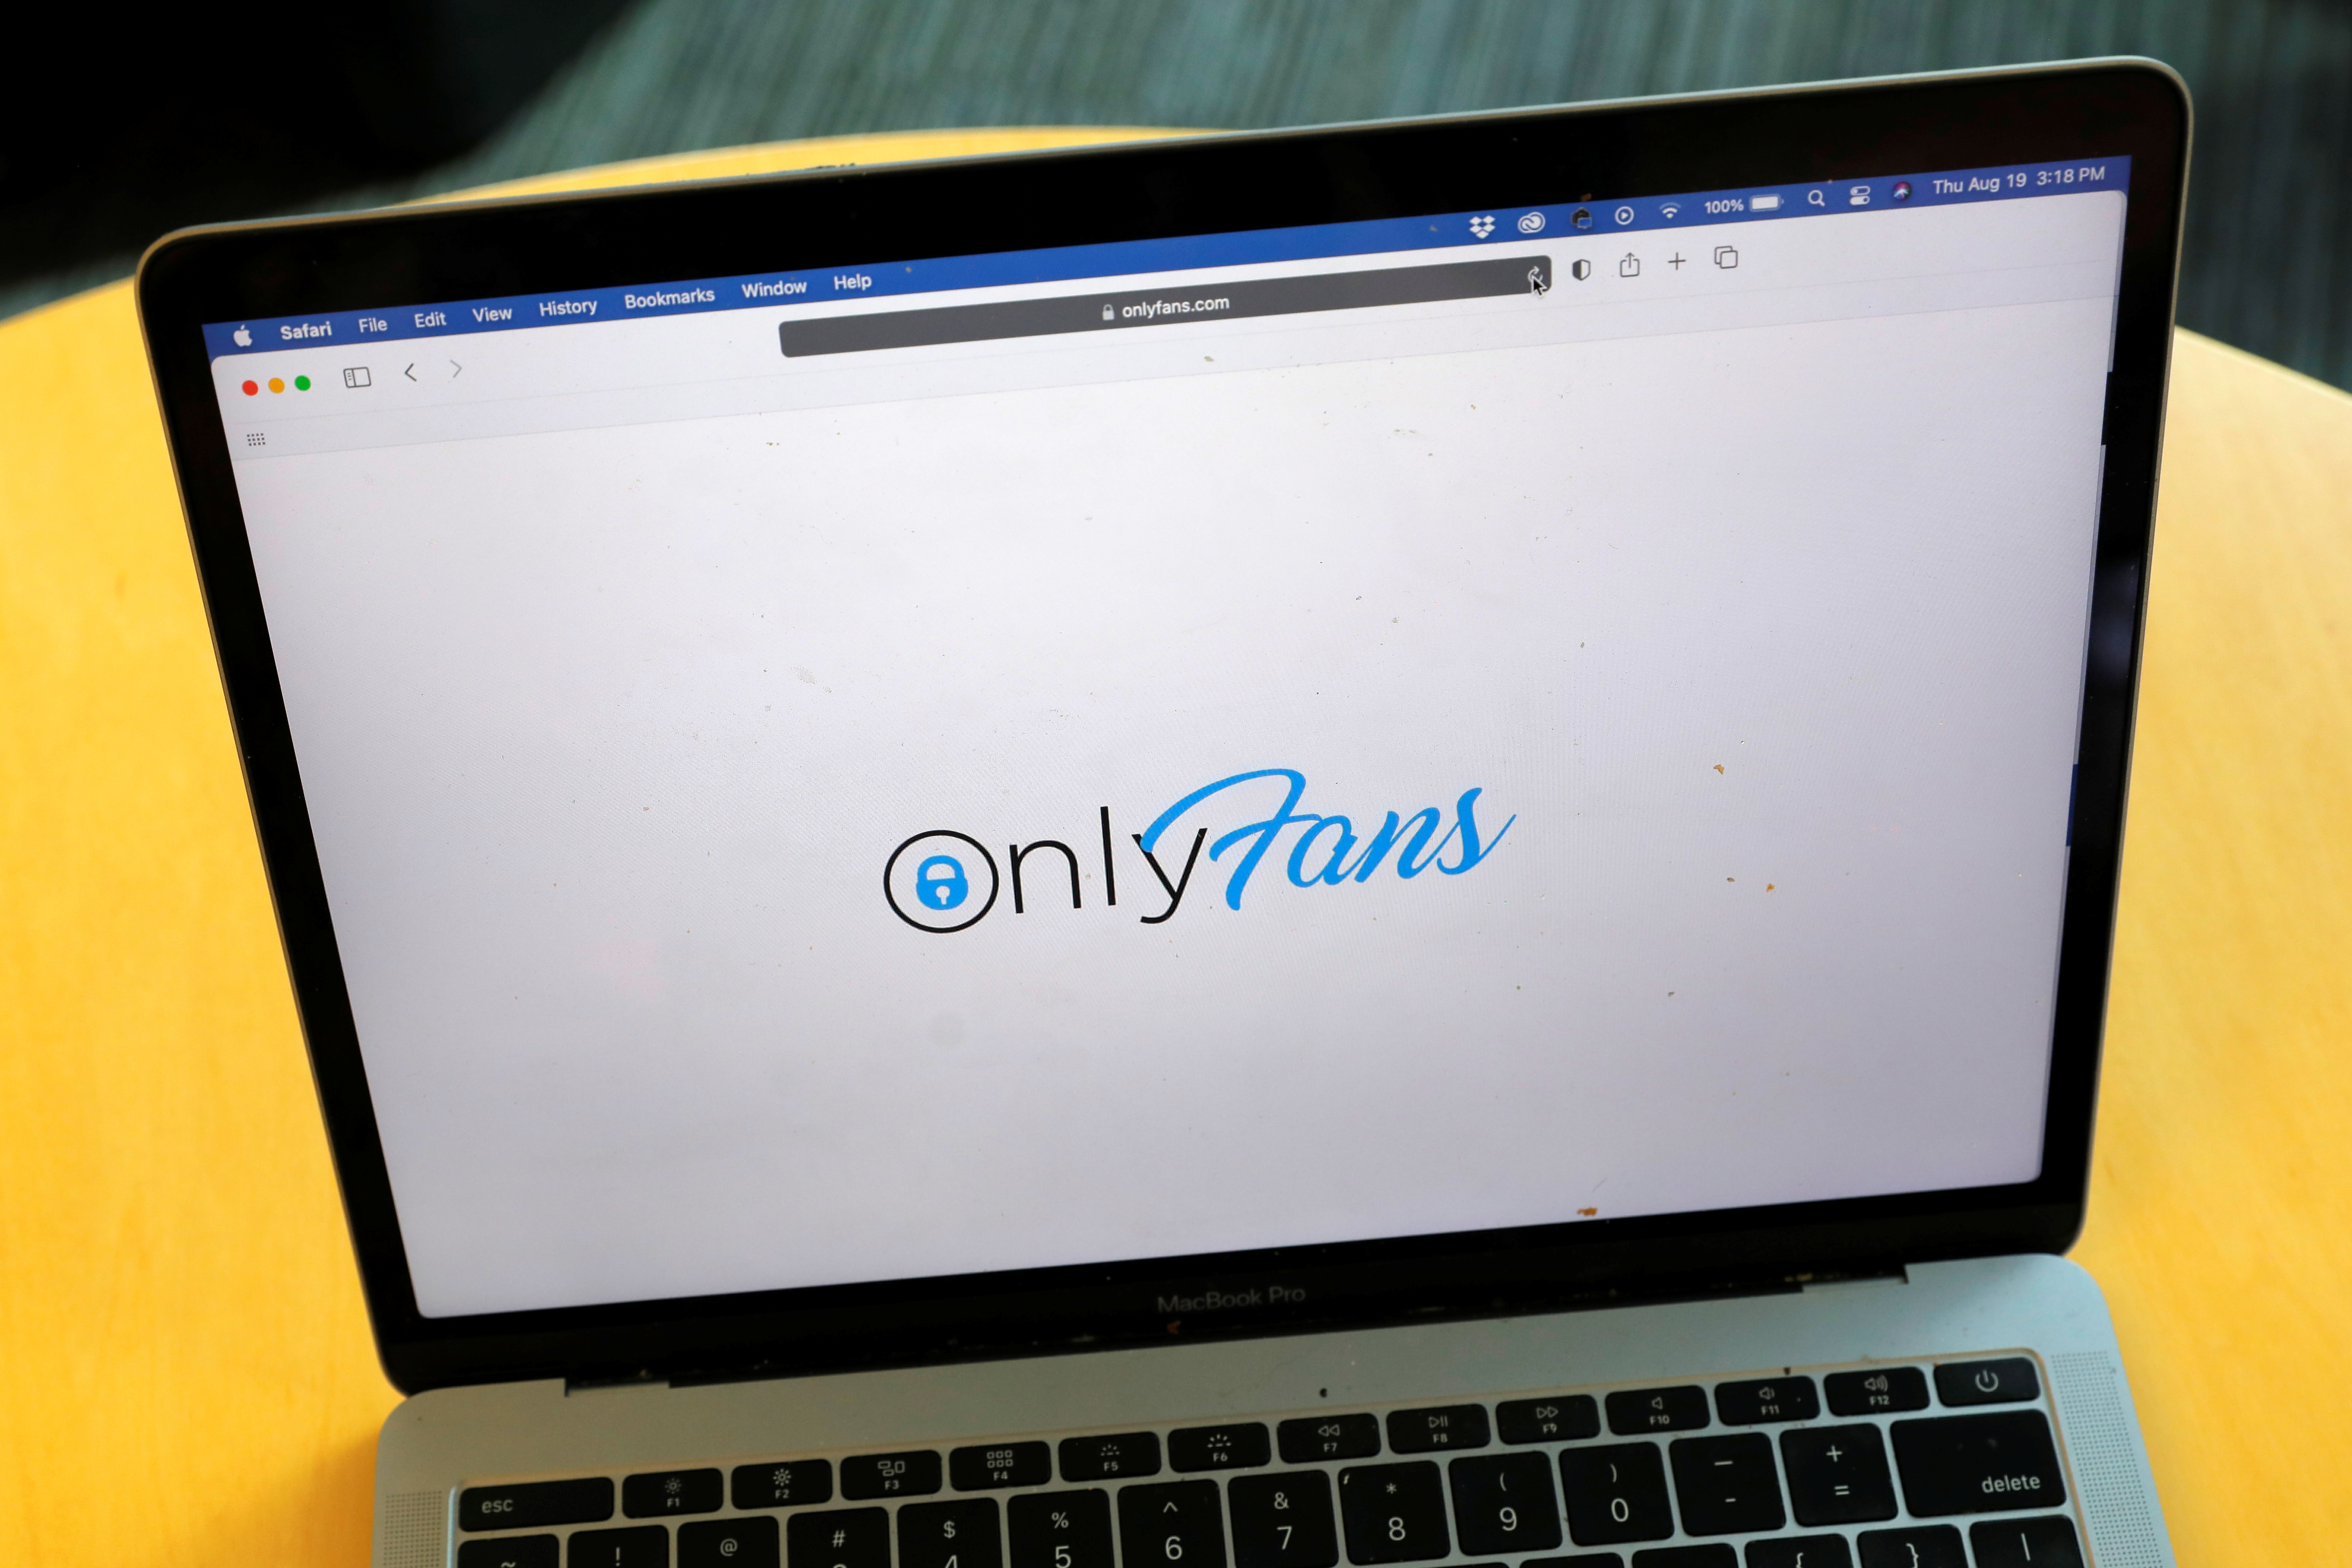 How to hide onlyfans on bank statement